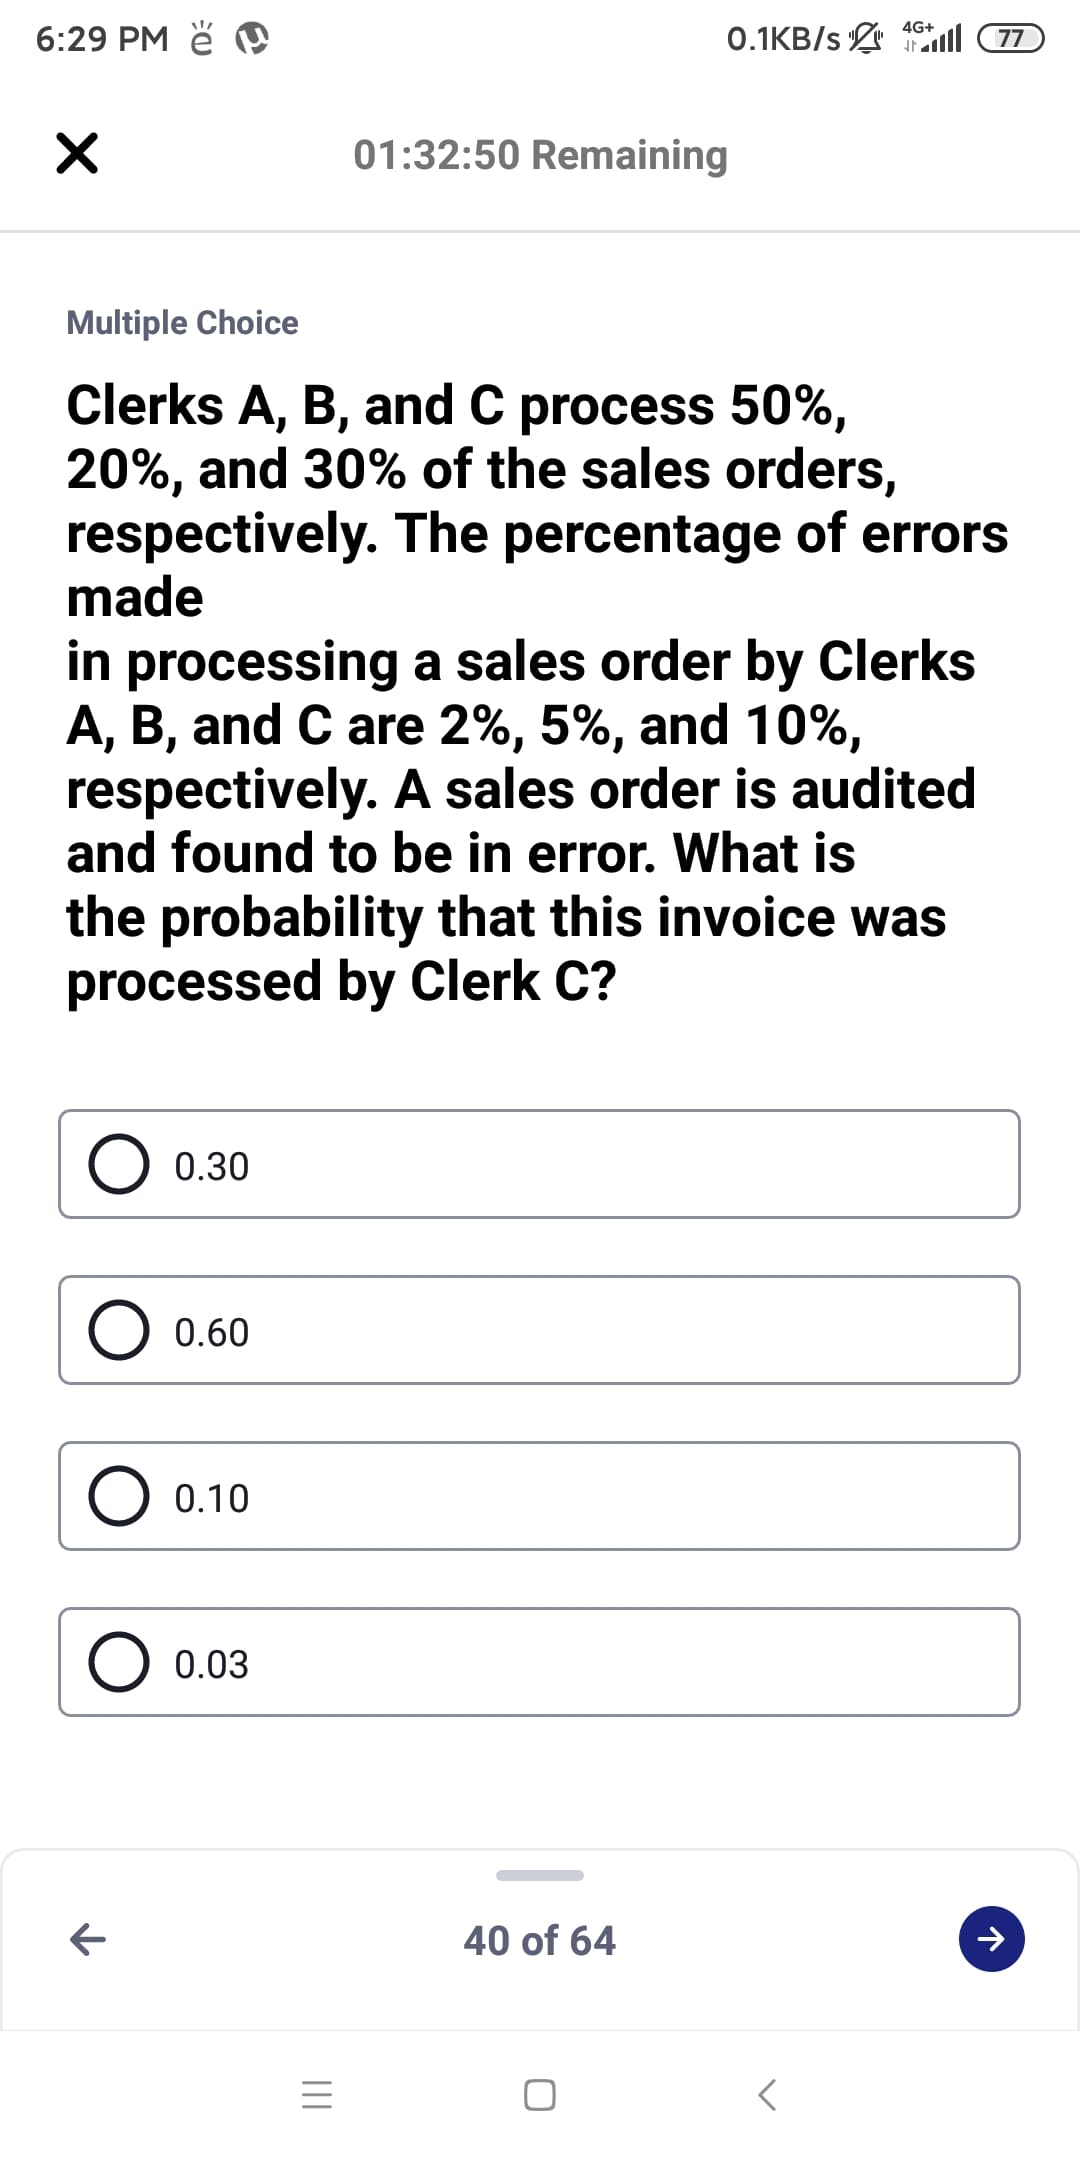 4G+
6:29 PM ě
0.1KB/s ll 77
01:32:50 Remaining
Multiple Choice
Clerks A, B, and C process 50%,
20%, and 30% of the sales orders,
respectively. The percentage of errors
made
in processing a sales order by Clerks
A, B, and C are 2%, 5%, and 10%,
respectively. A sales order is audited
and found to be in error. What is
the probability that this invoice was
processed by Clerk C?
O 0.30
O 0.60
O 0.10
0.03
40 of 64
II
